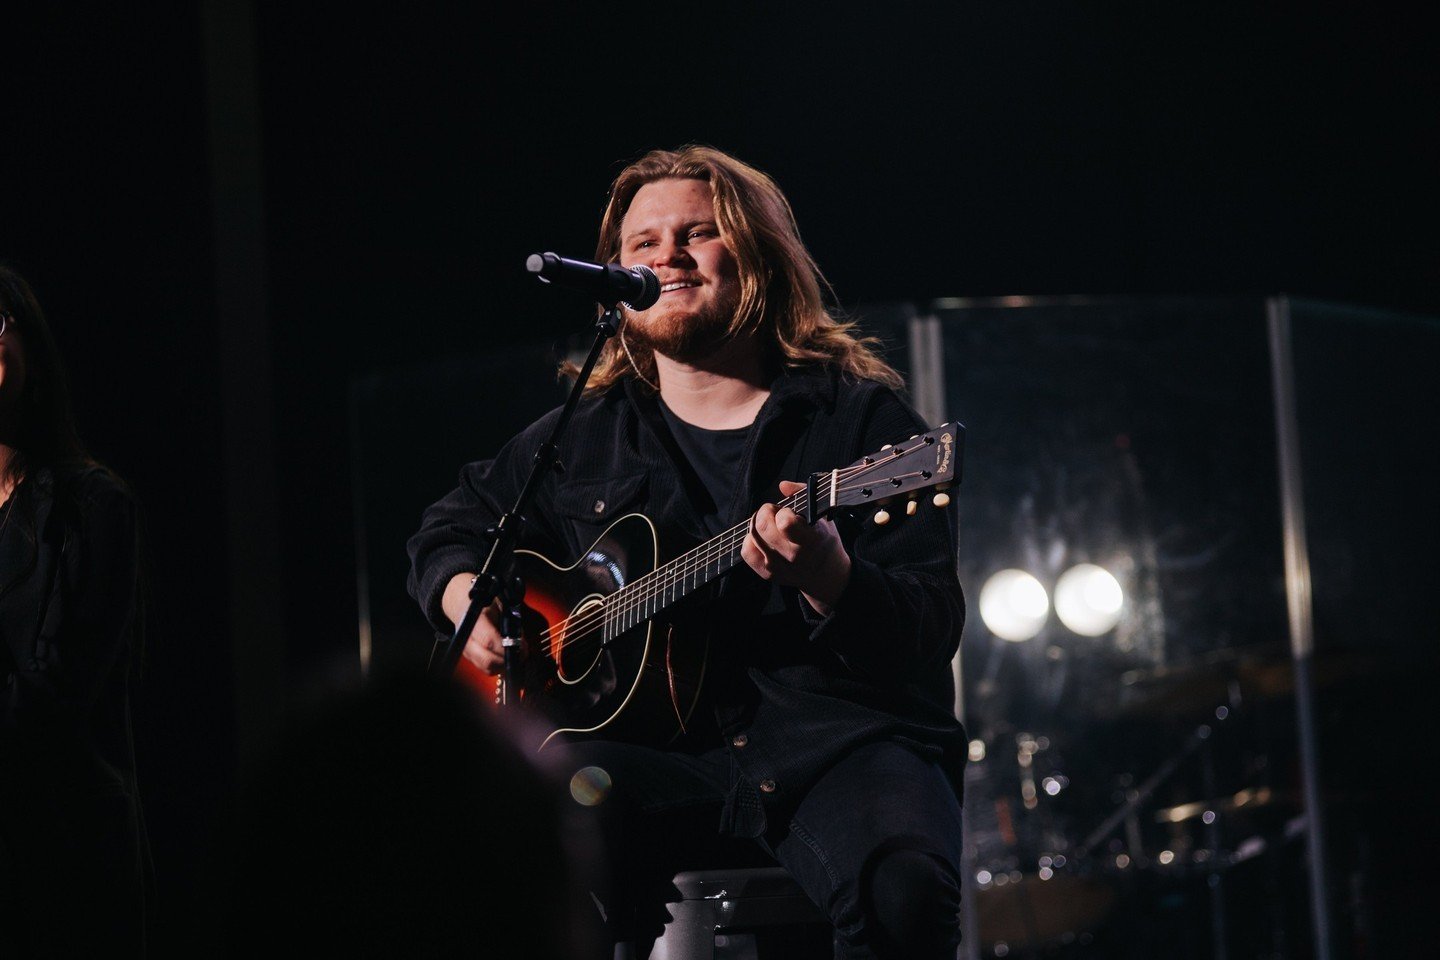 It&rsquo;s a great day to worship Jesus! See you at church!⁠
⁠
Service Times:⁠
⁠
Spring Arbor:⁠
9:00AM, 10:45AM, 12:30PM⁠
⁠
Sycamore:⁠
9:15AM &amp; 11AM